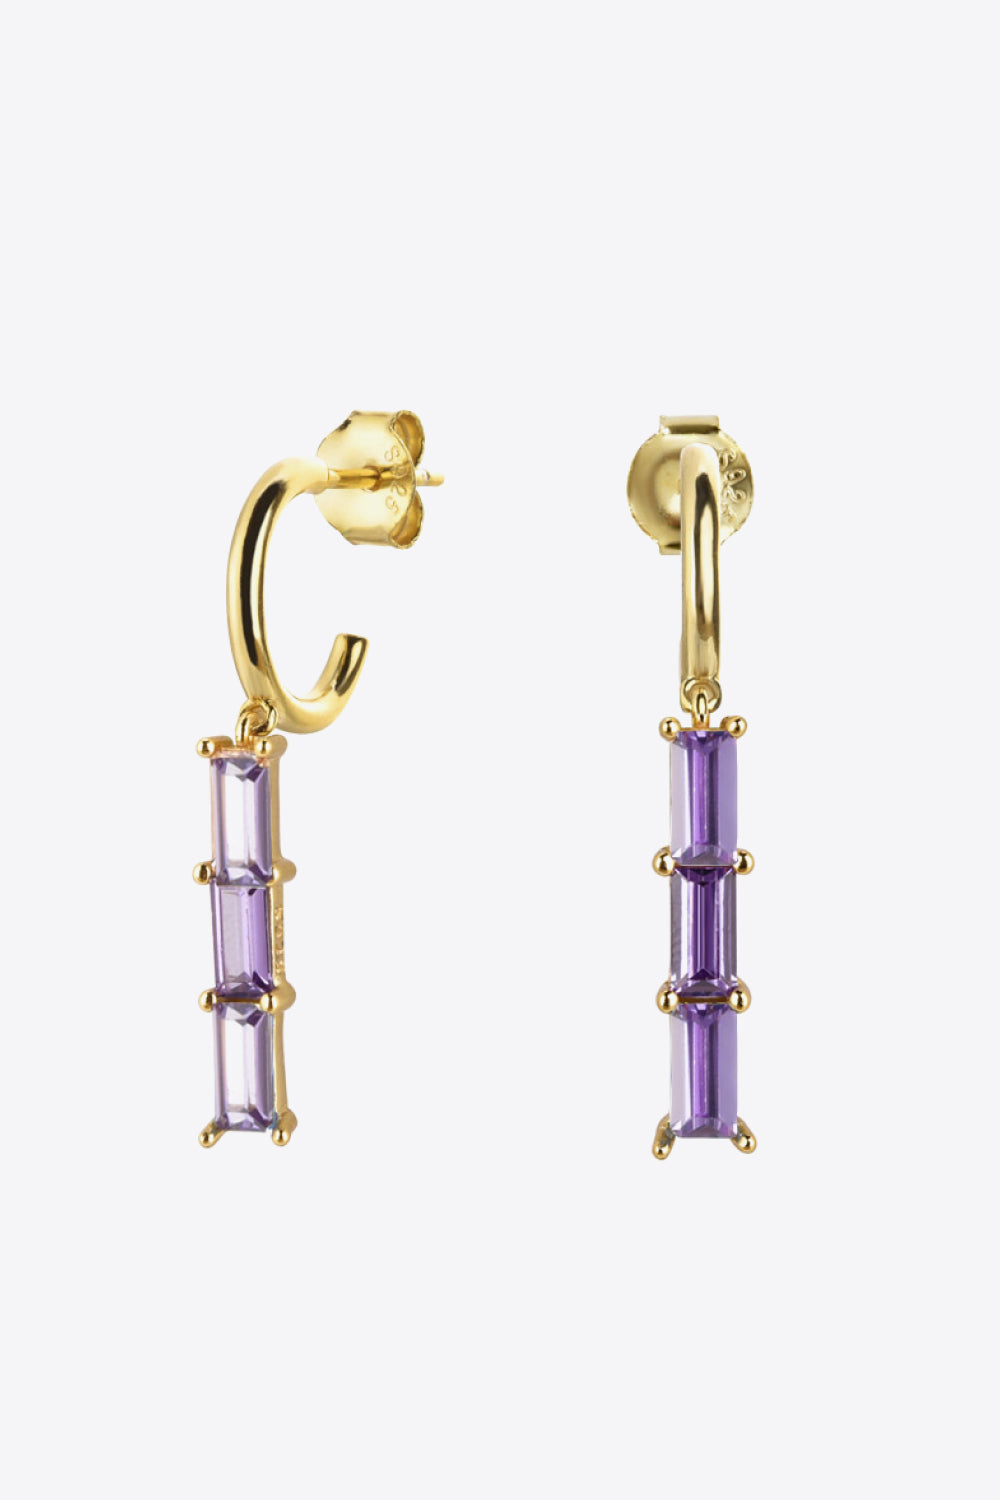 GOLD PURPLE ONE SIZE - Inlaid Zircon 925 Sterling Silver Earrings - 7 colors - earrings at TFC&H Co.